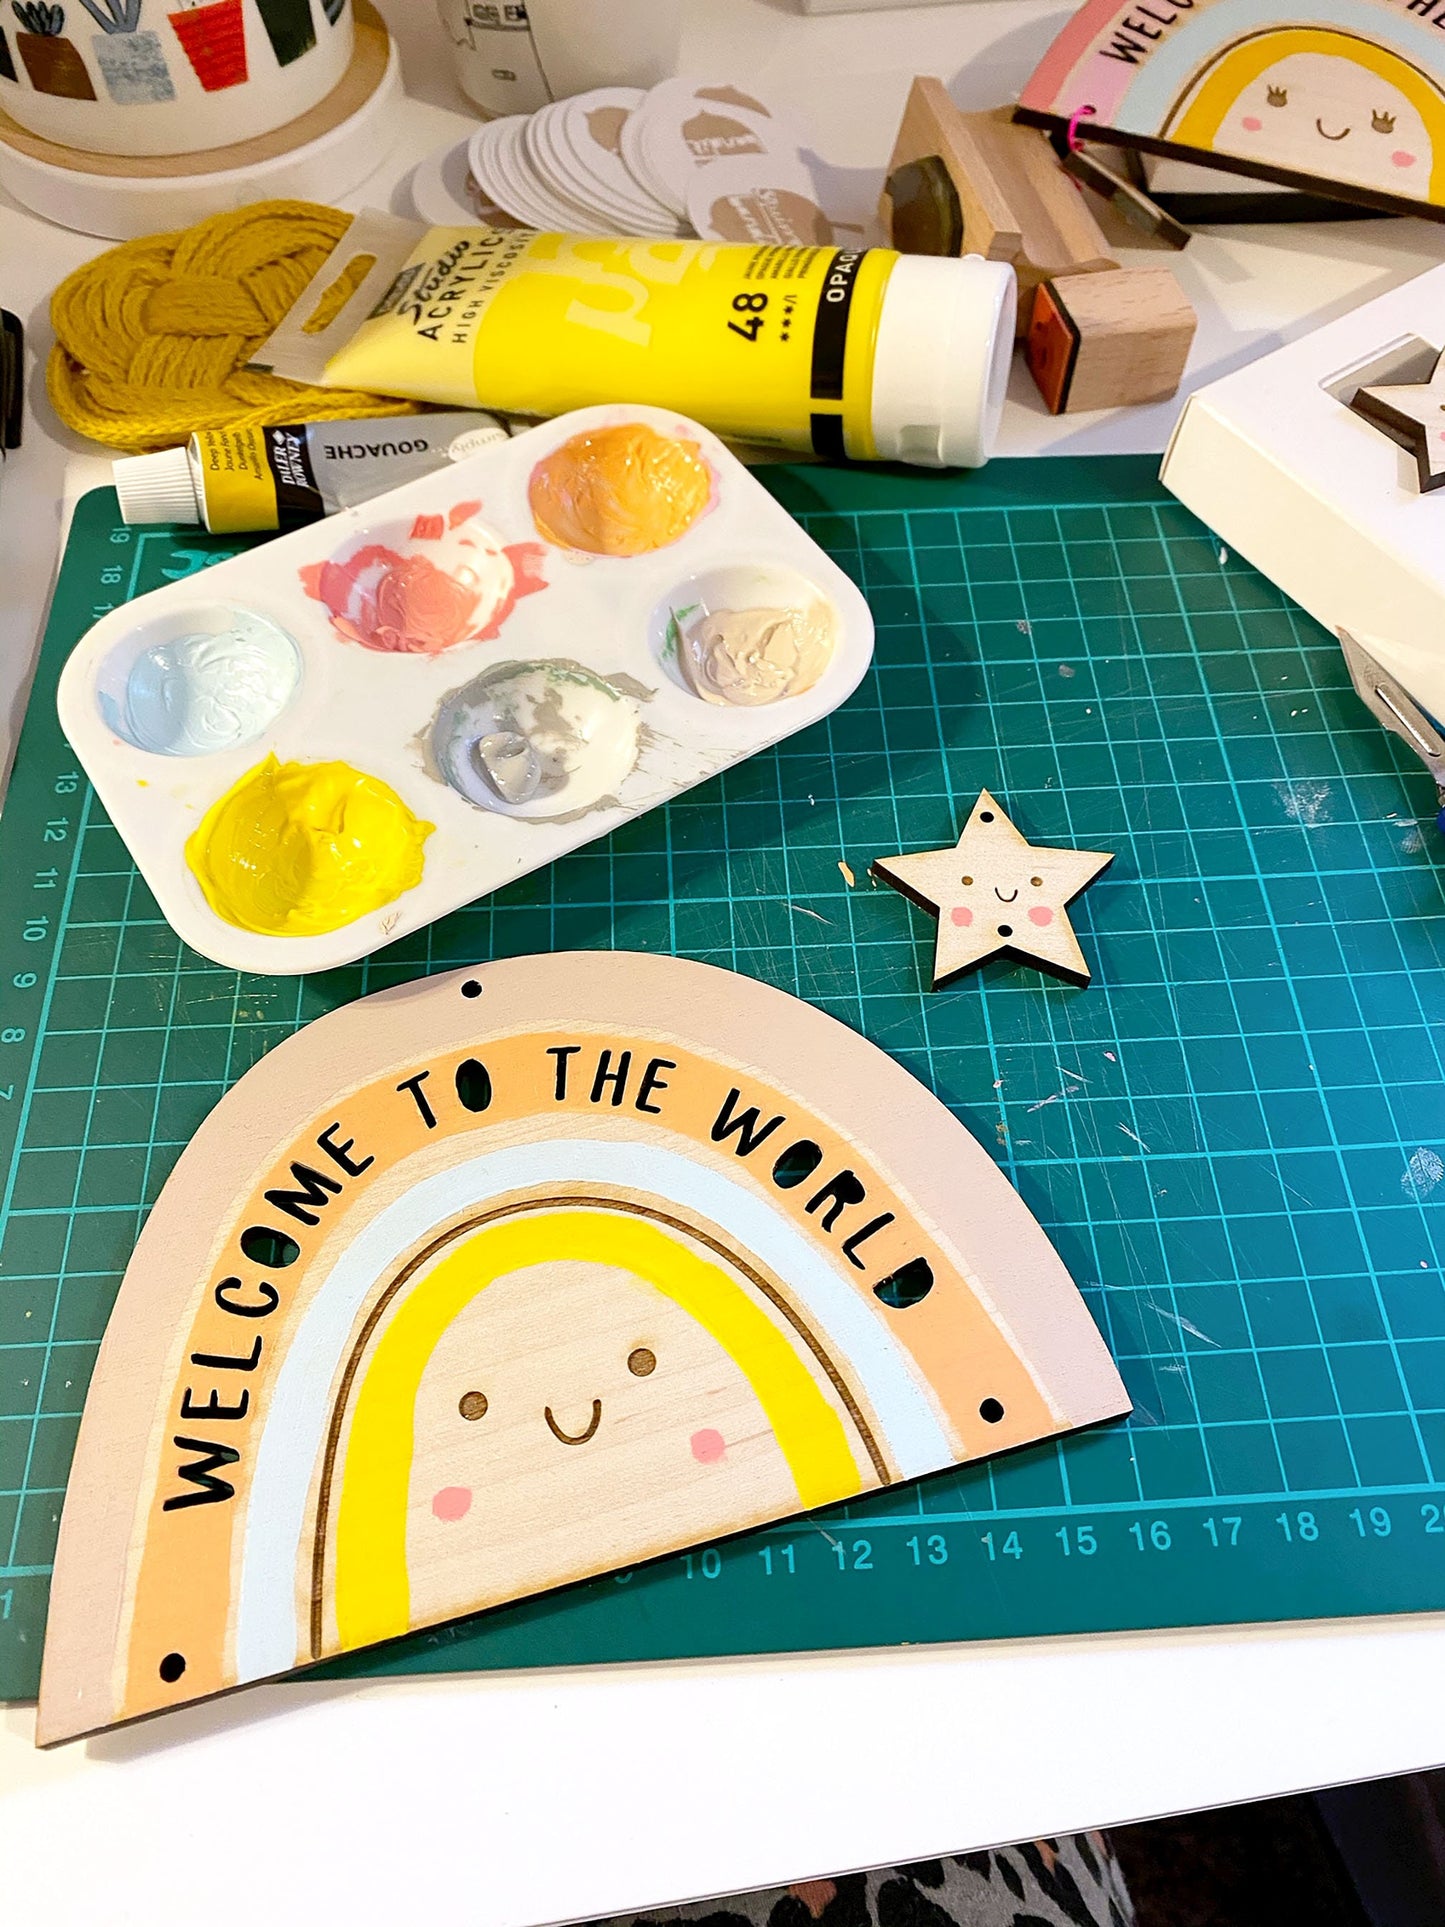 Welcome to the world new baby wooden keepsake